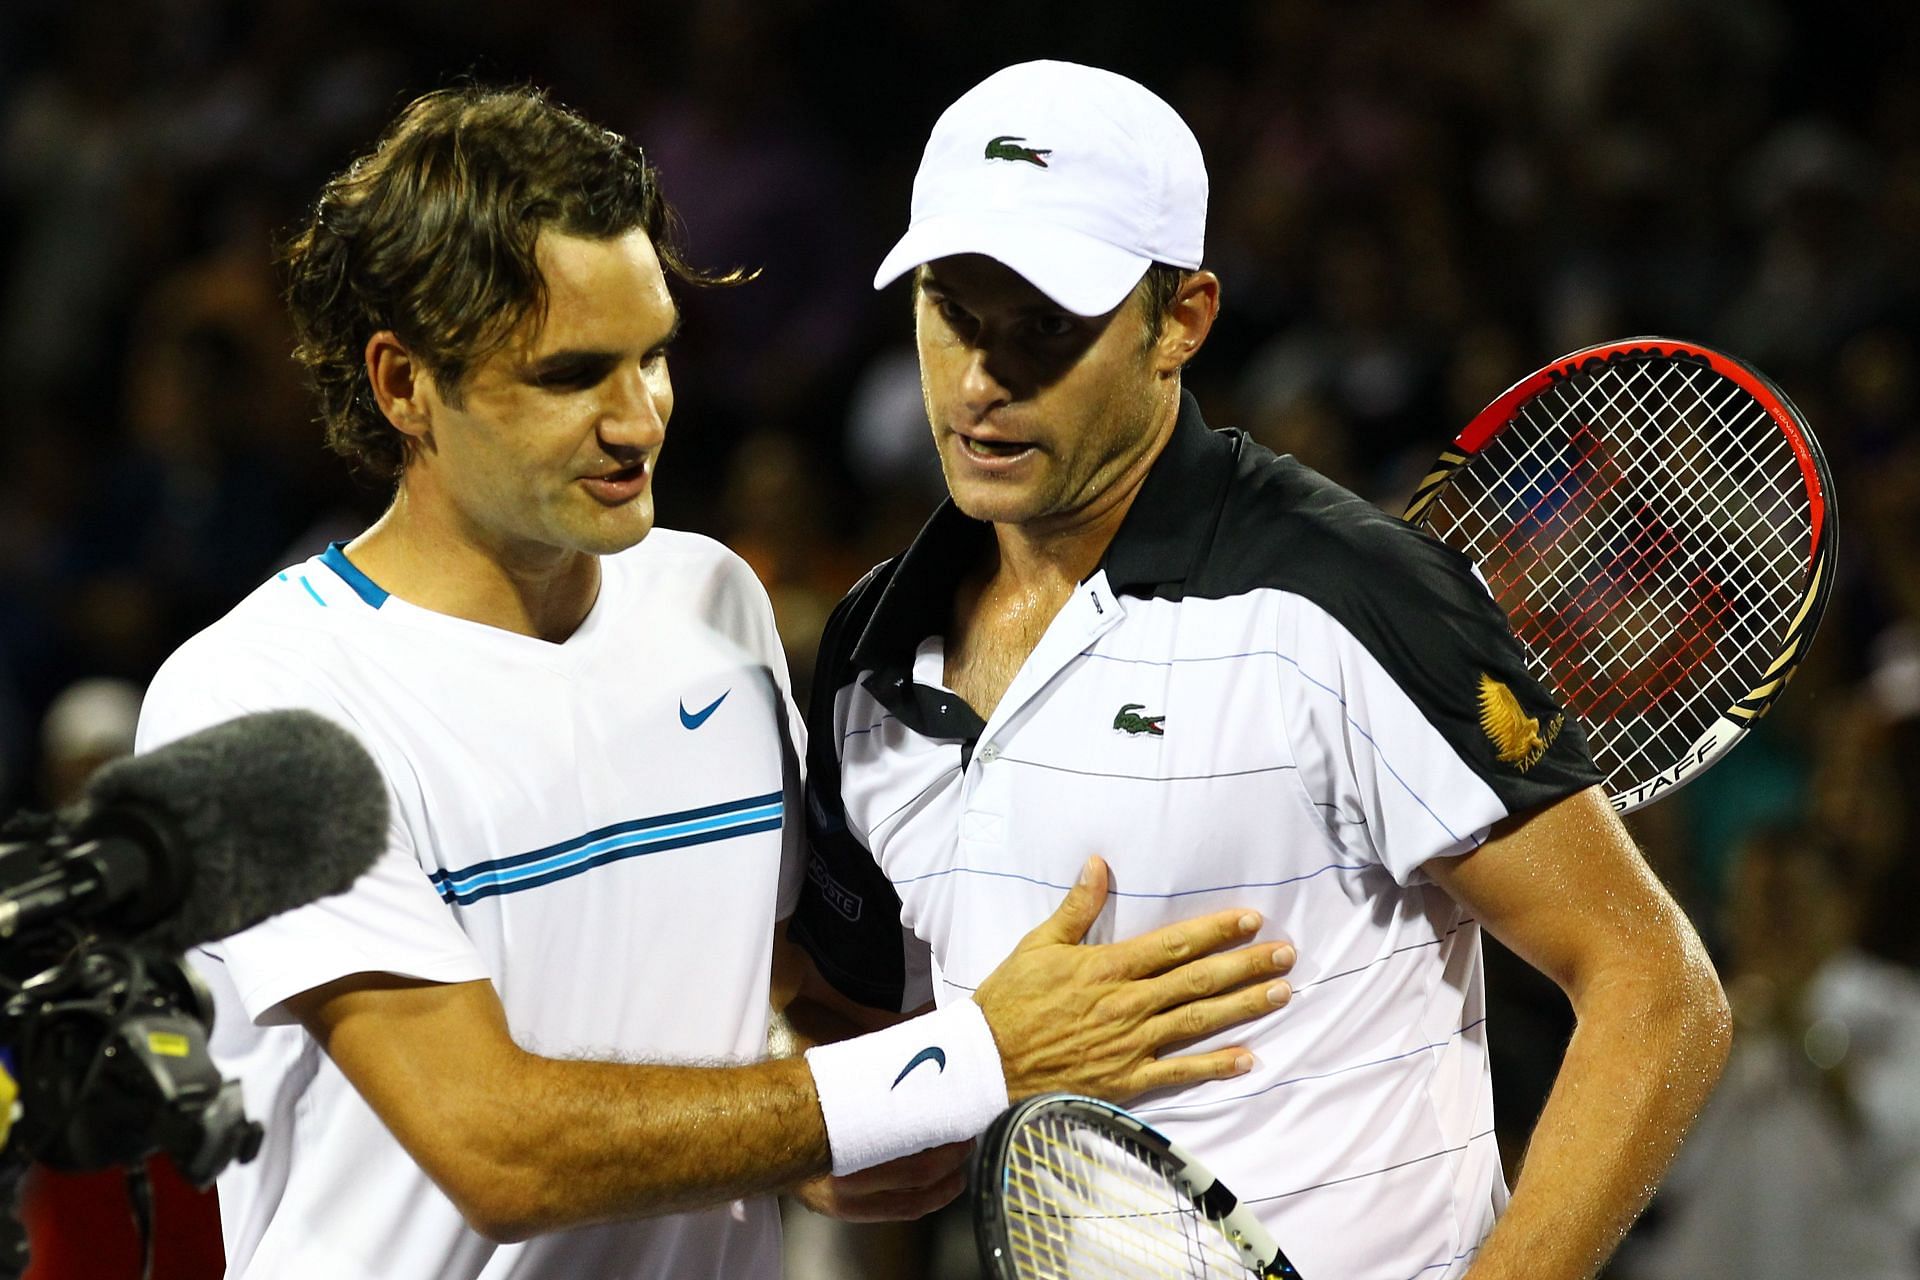 Roger Federer and Andy Roddick pictured at the 2012 Sony Ericsson Open in Key Biscayne, Florida.